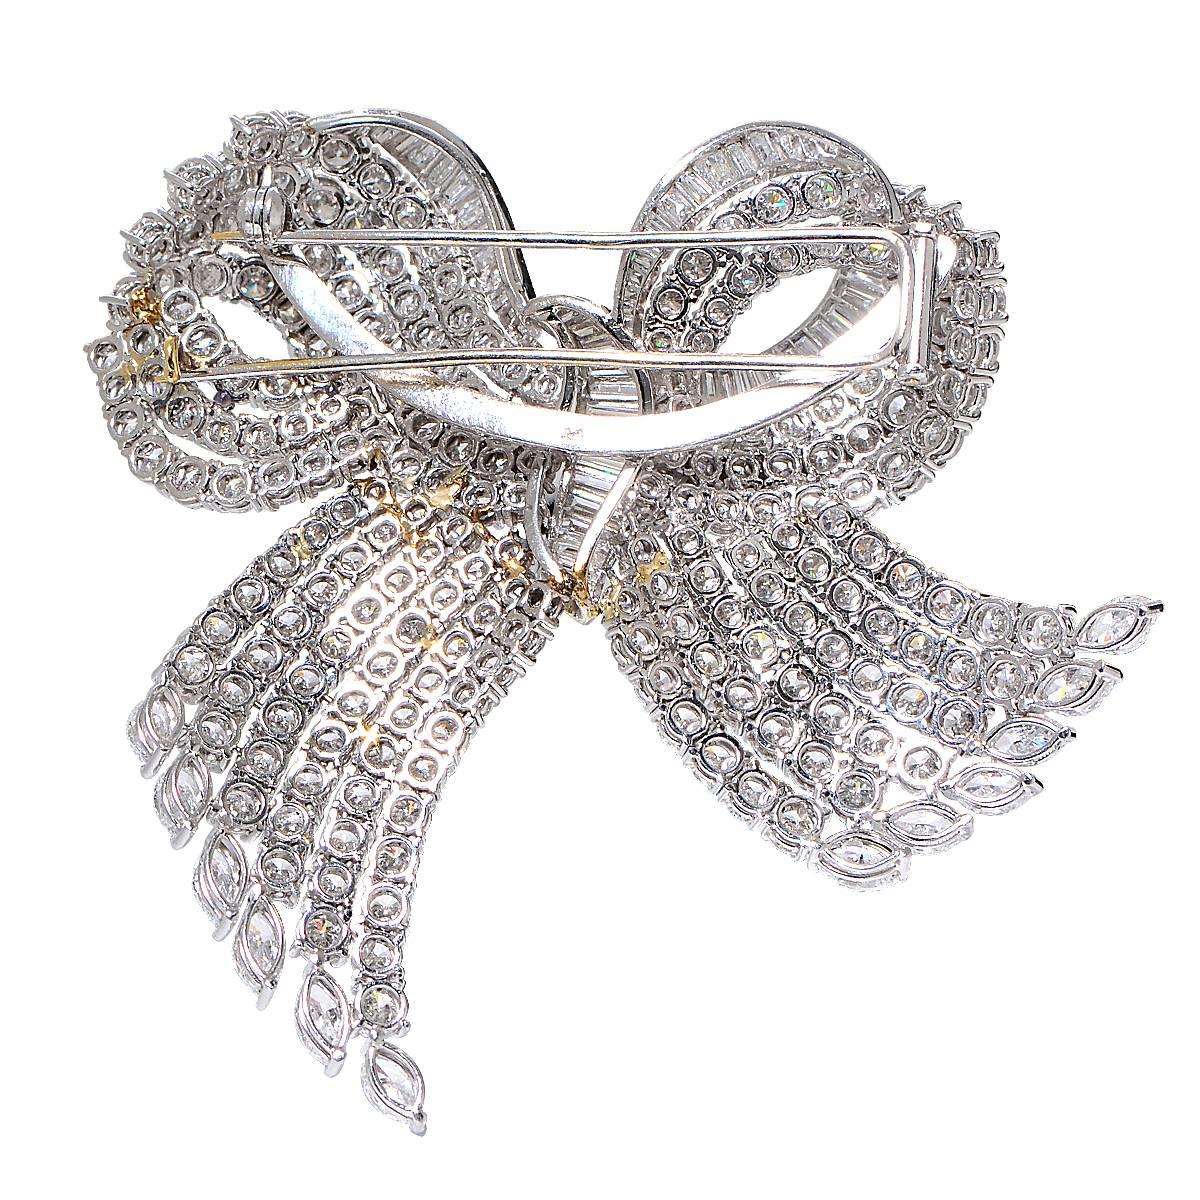 Platinum Bow Pin Containing 291 Round Brilliant, Baguette and Marquise Cut Diamonds Weighing Approximately 24cts, F Color, VS Clarity.